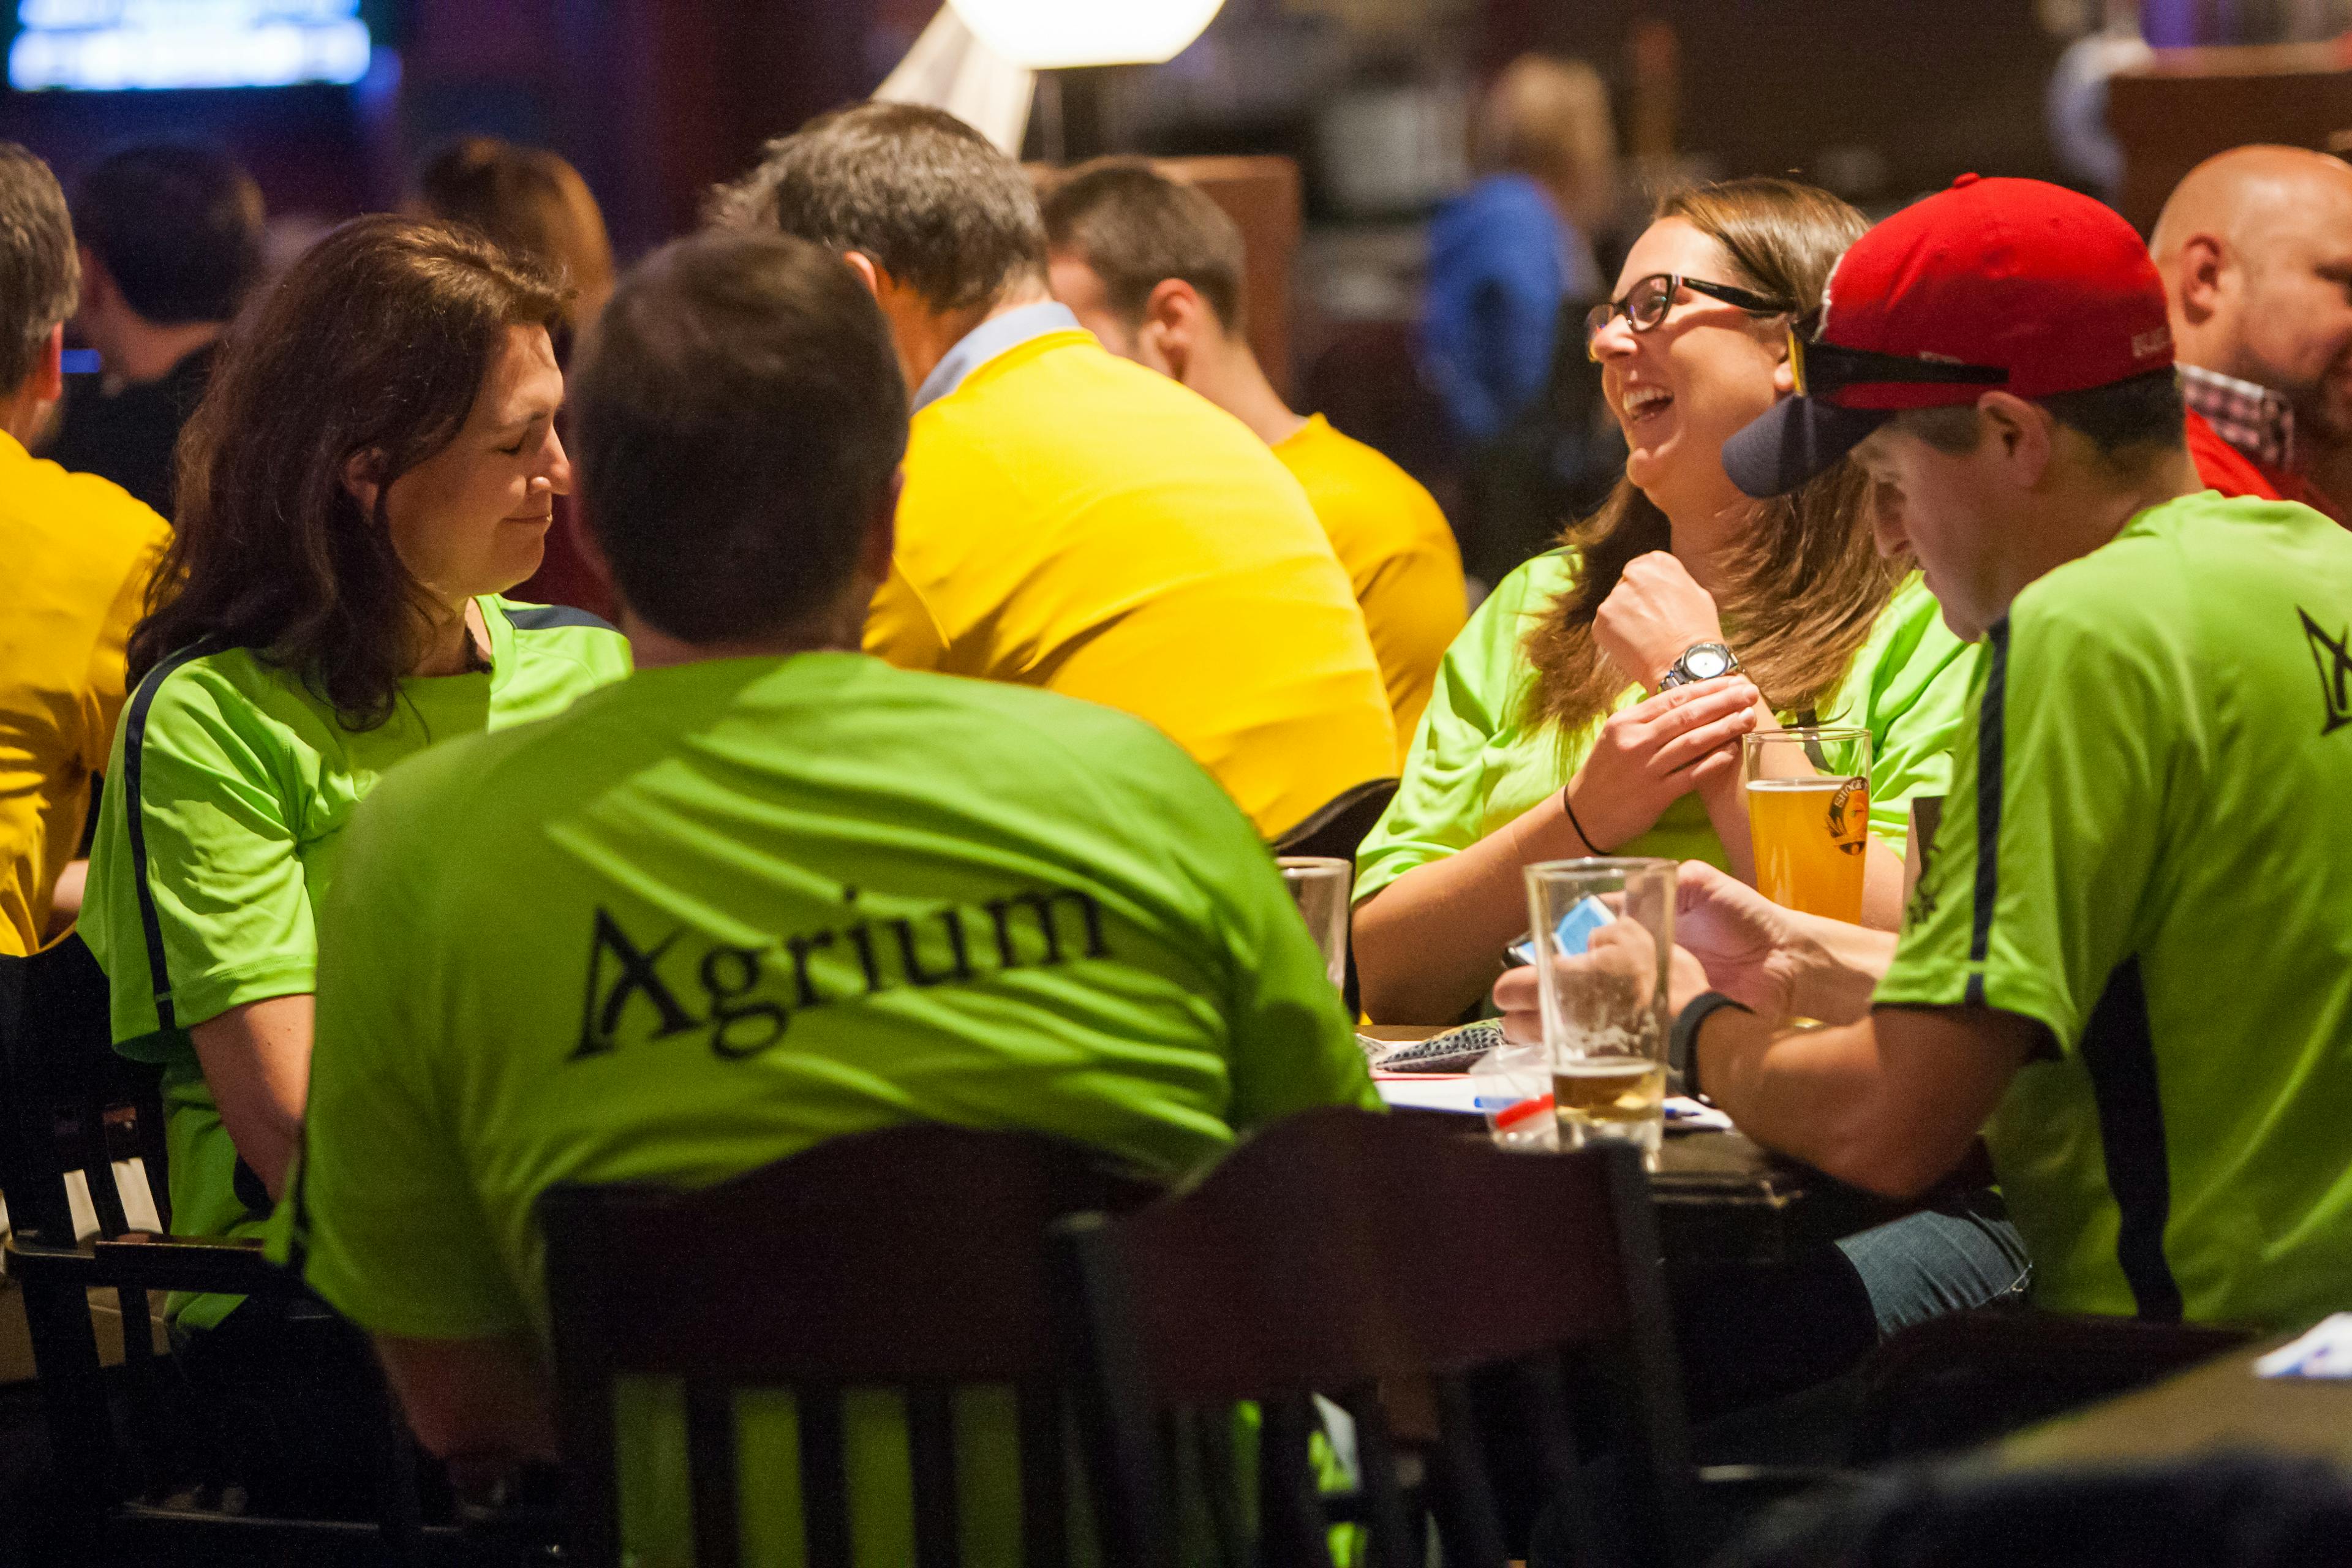 group of 4 people in green shirts playing trivia